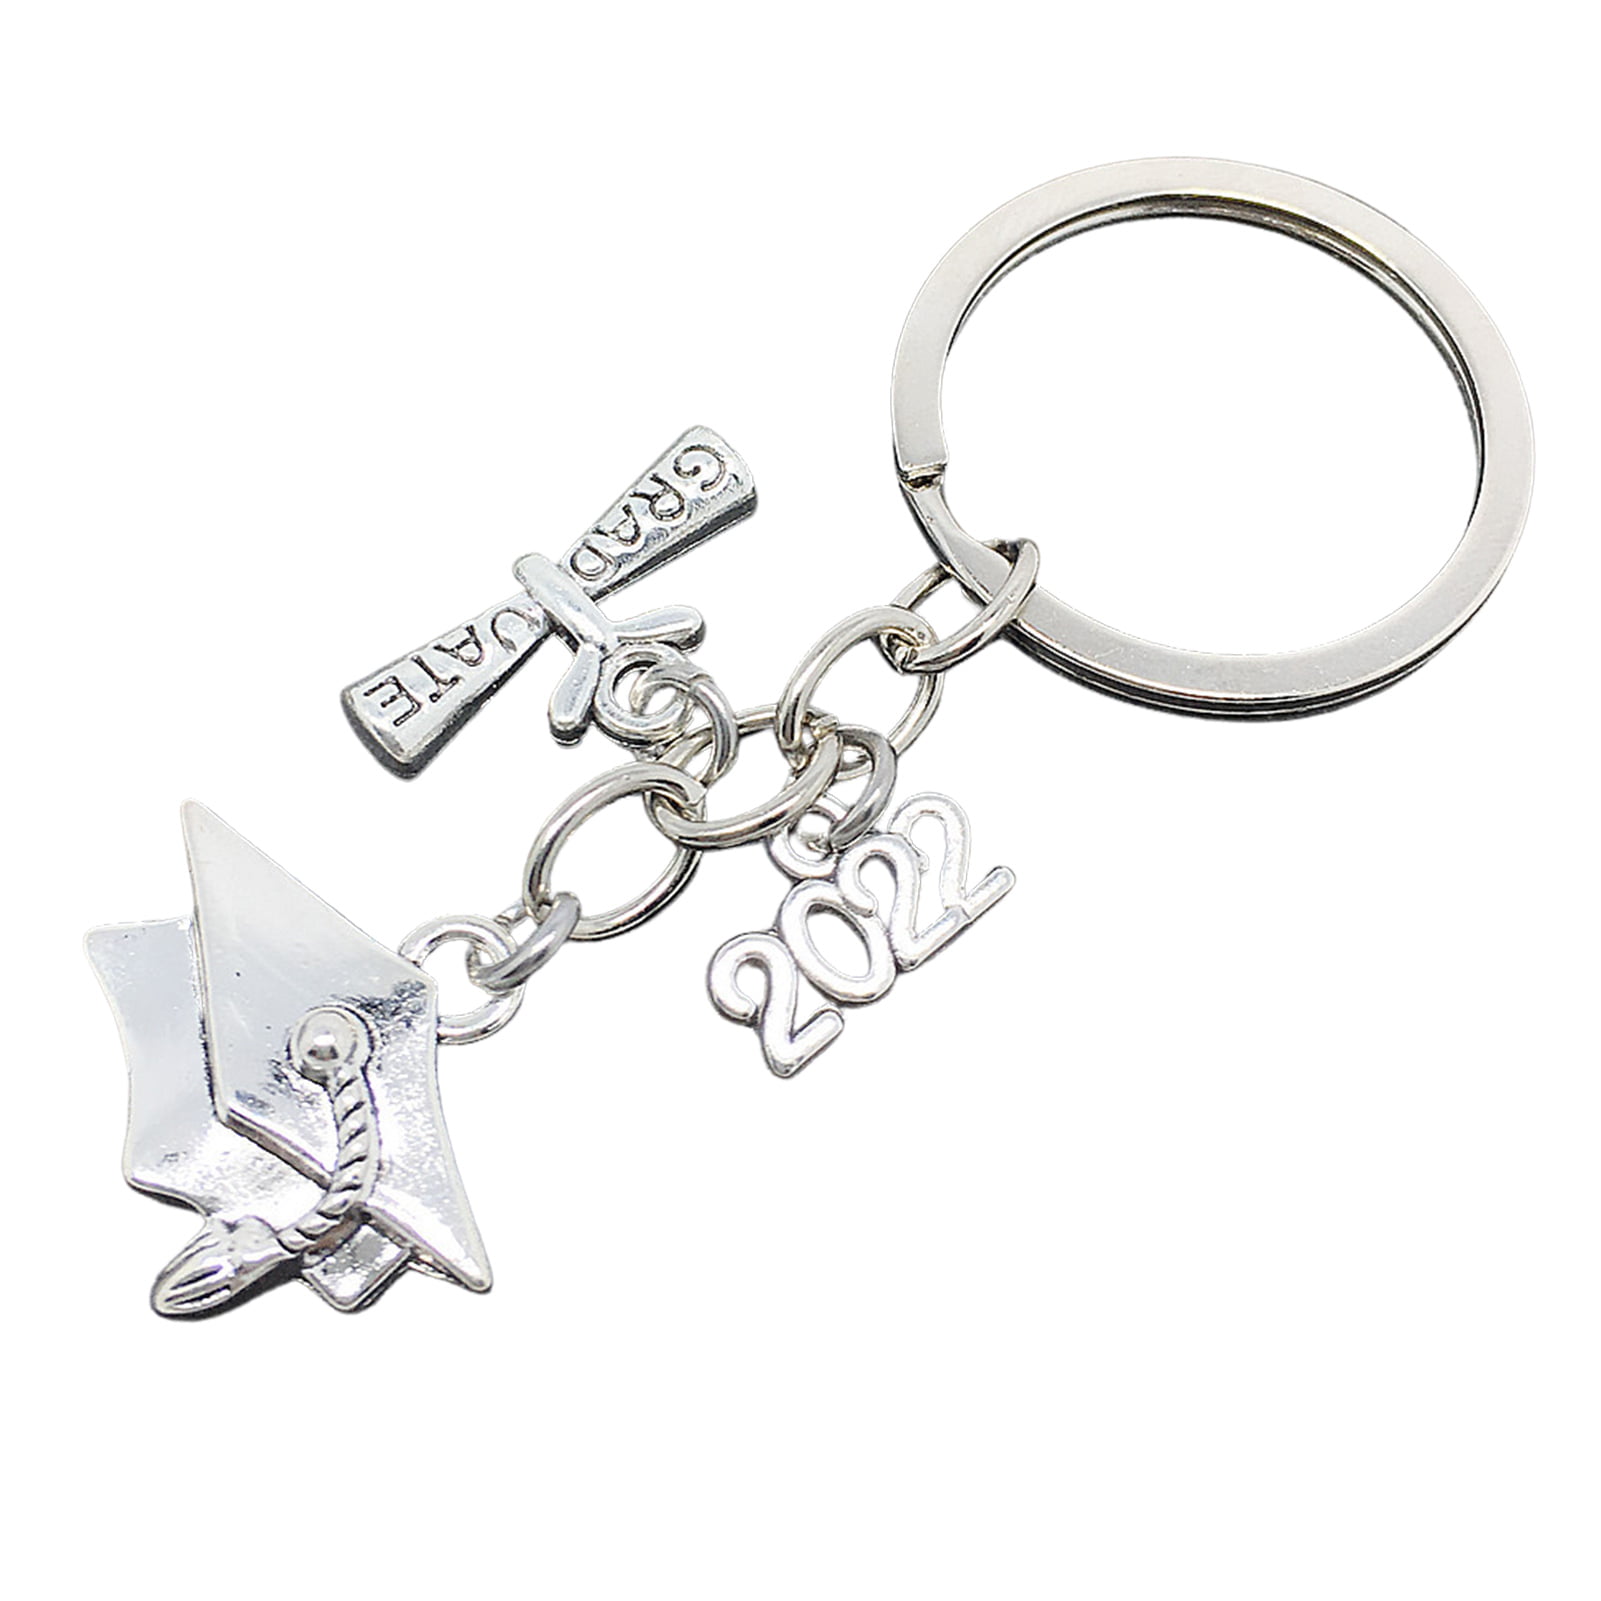 24 Pieces Graduation Keychains Inspirational 2022 Grad Gifts Class of 2022 Gifts College Grad Gifts for Him Her Graduation Gift Keychain Rubber Keyring Encourage Key Chain for Graduation Supplies 